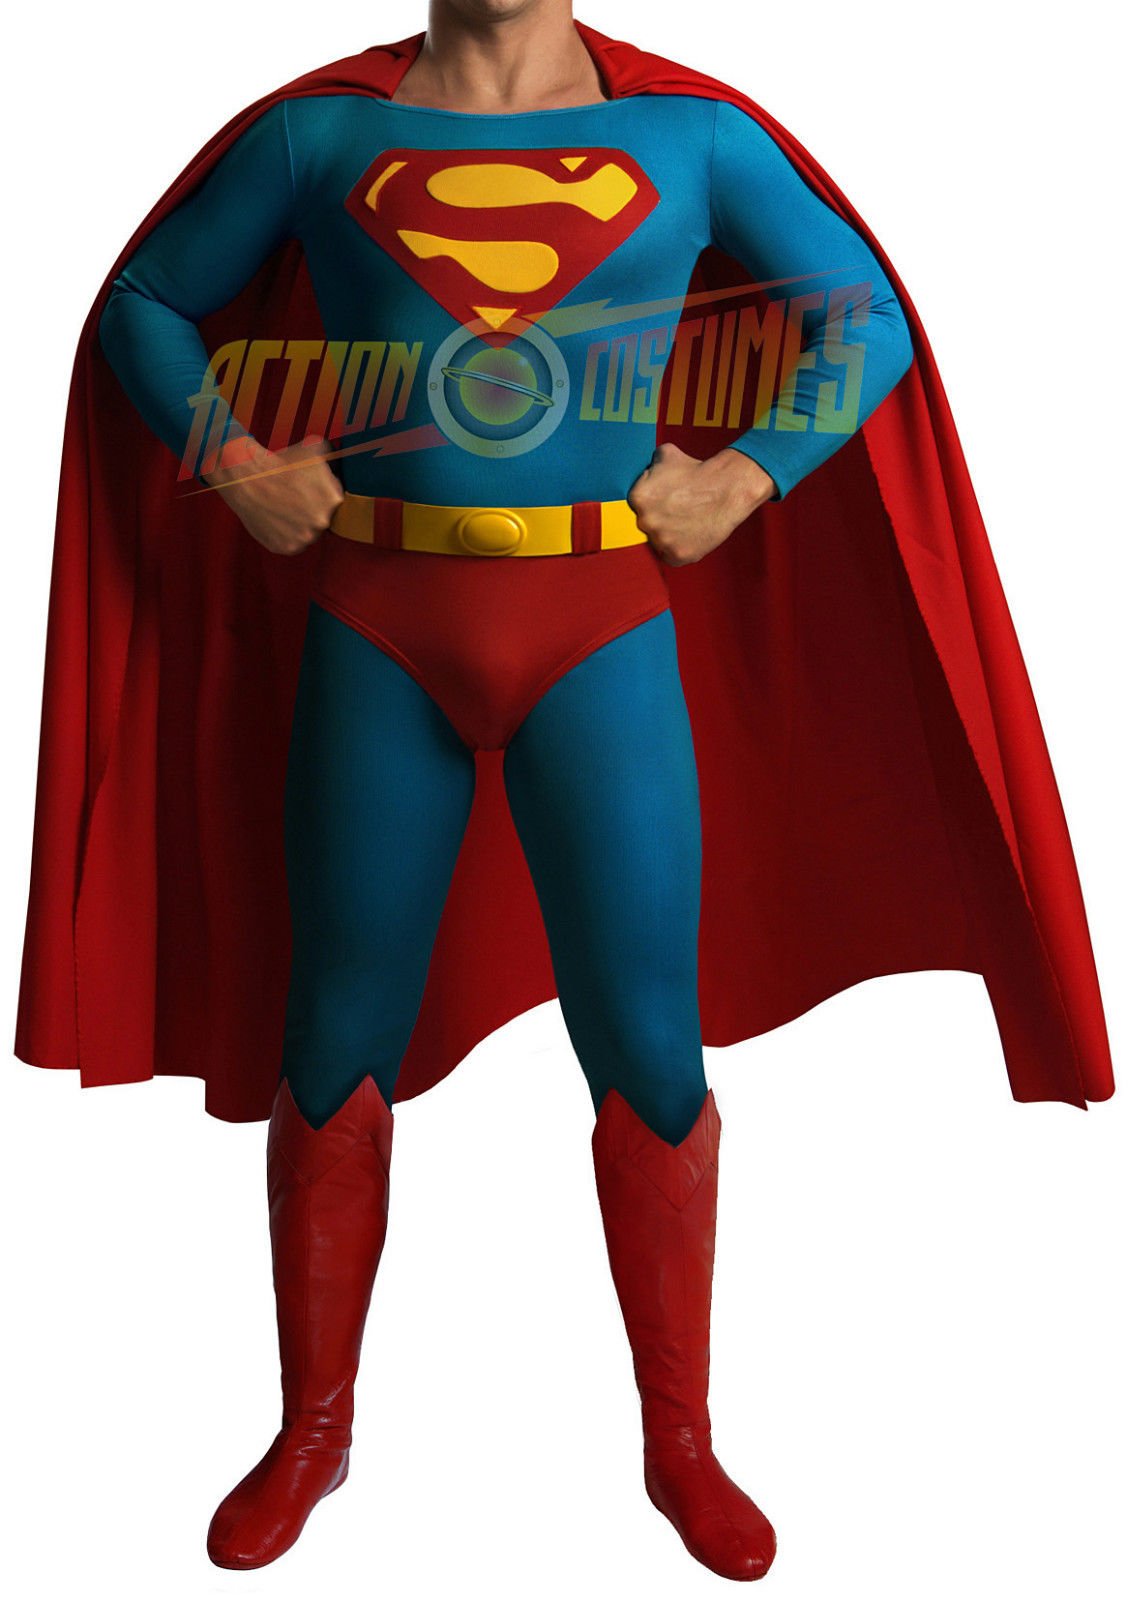 And someone paid 2,999 for this Superman costume